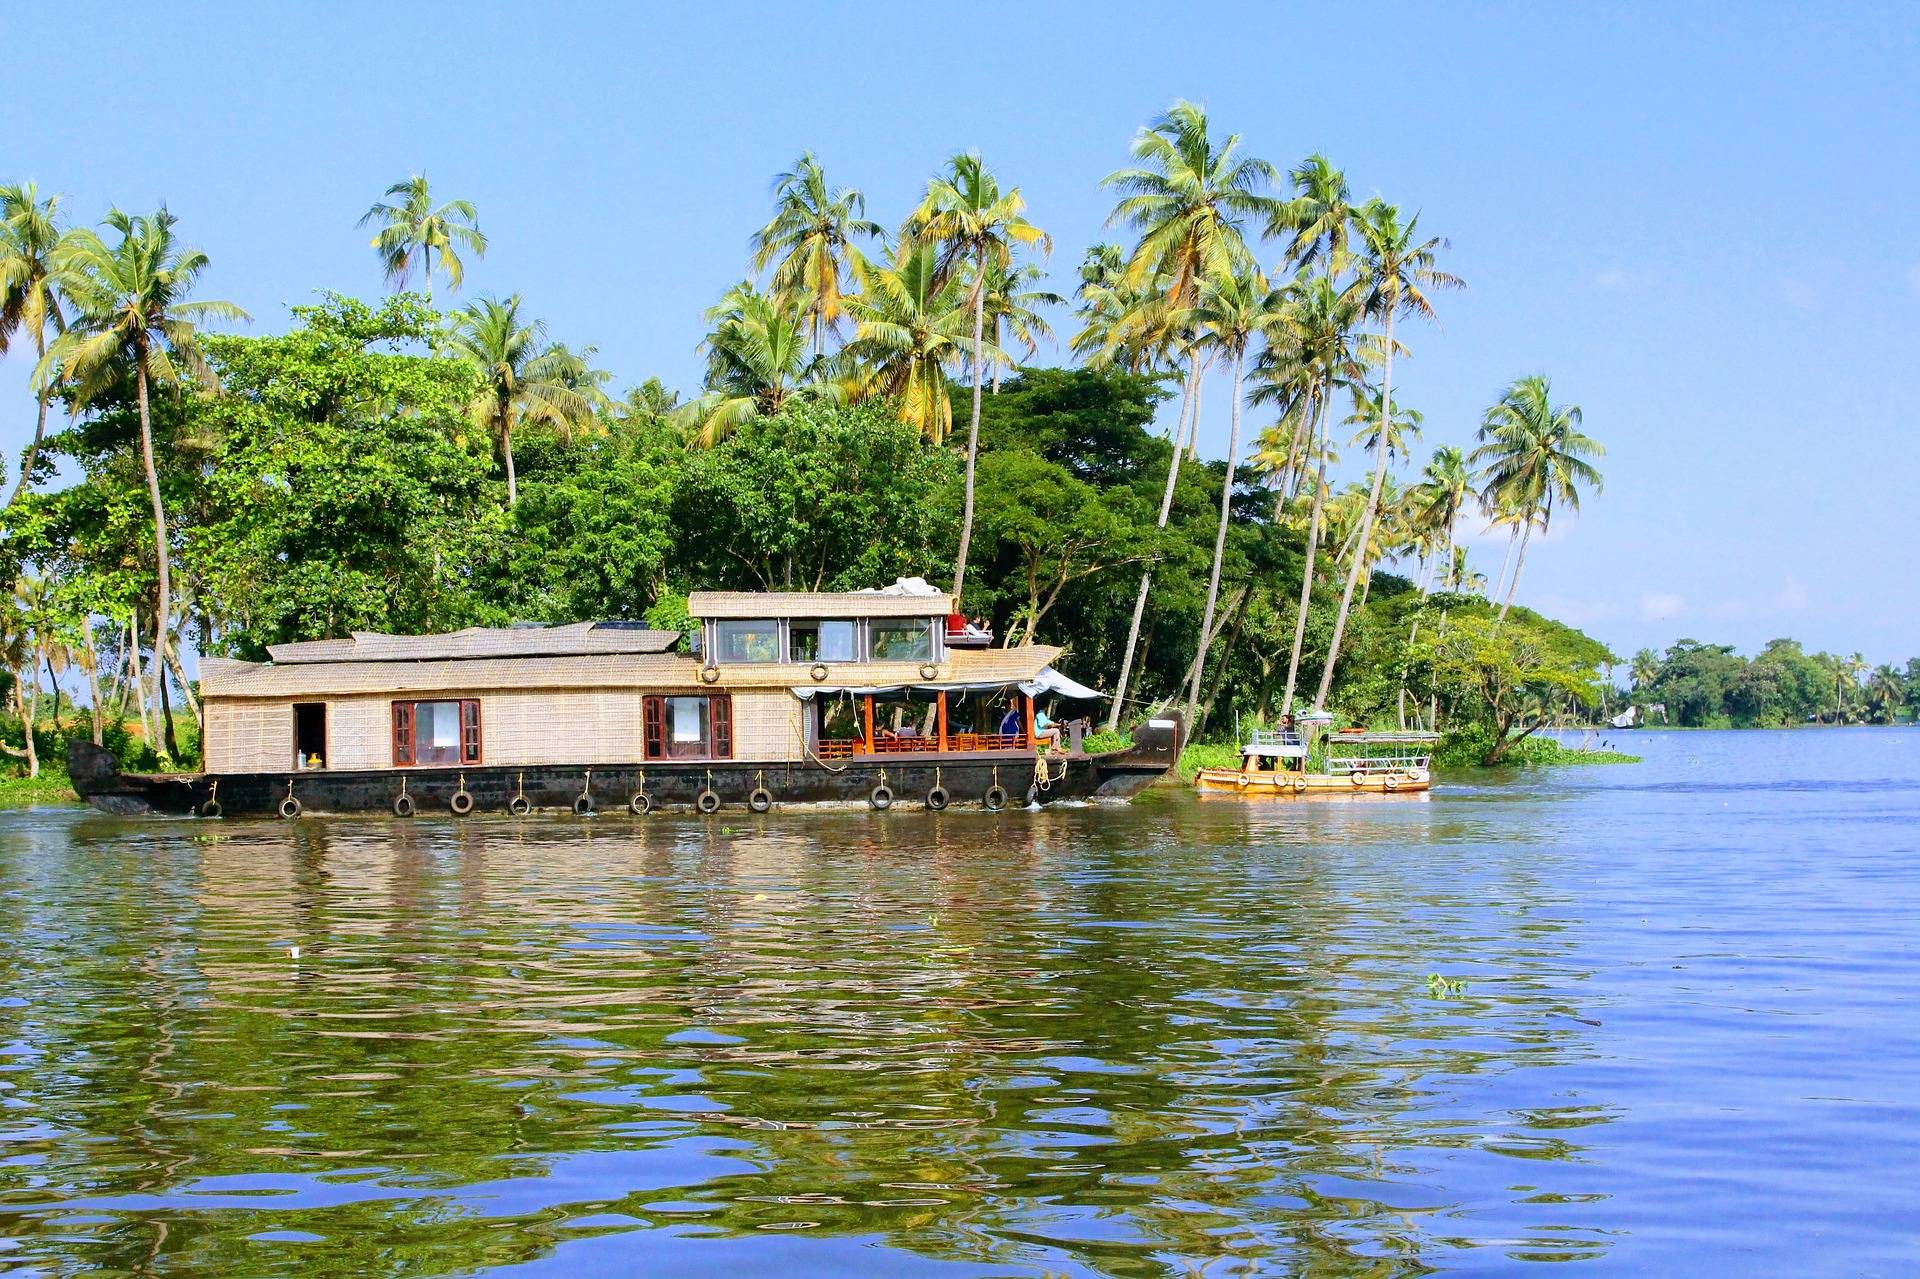 A Houseboat Ride from Alleppey to Munroe Island